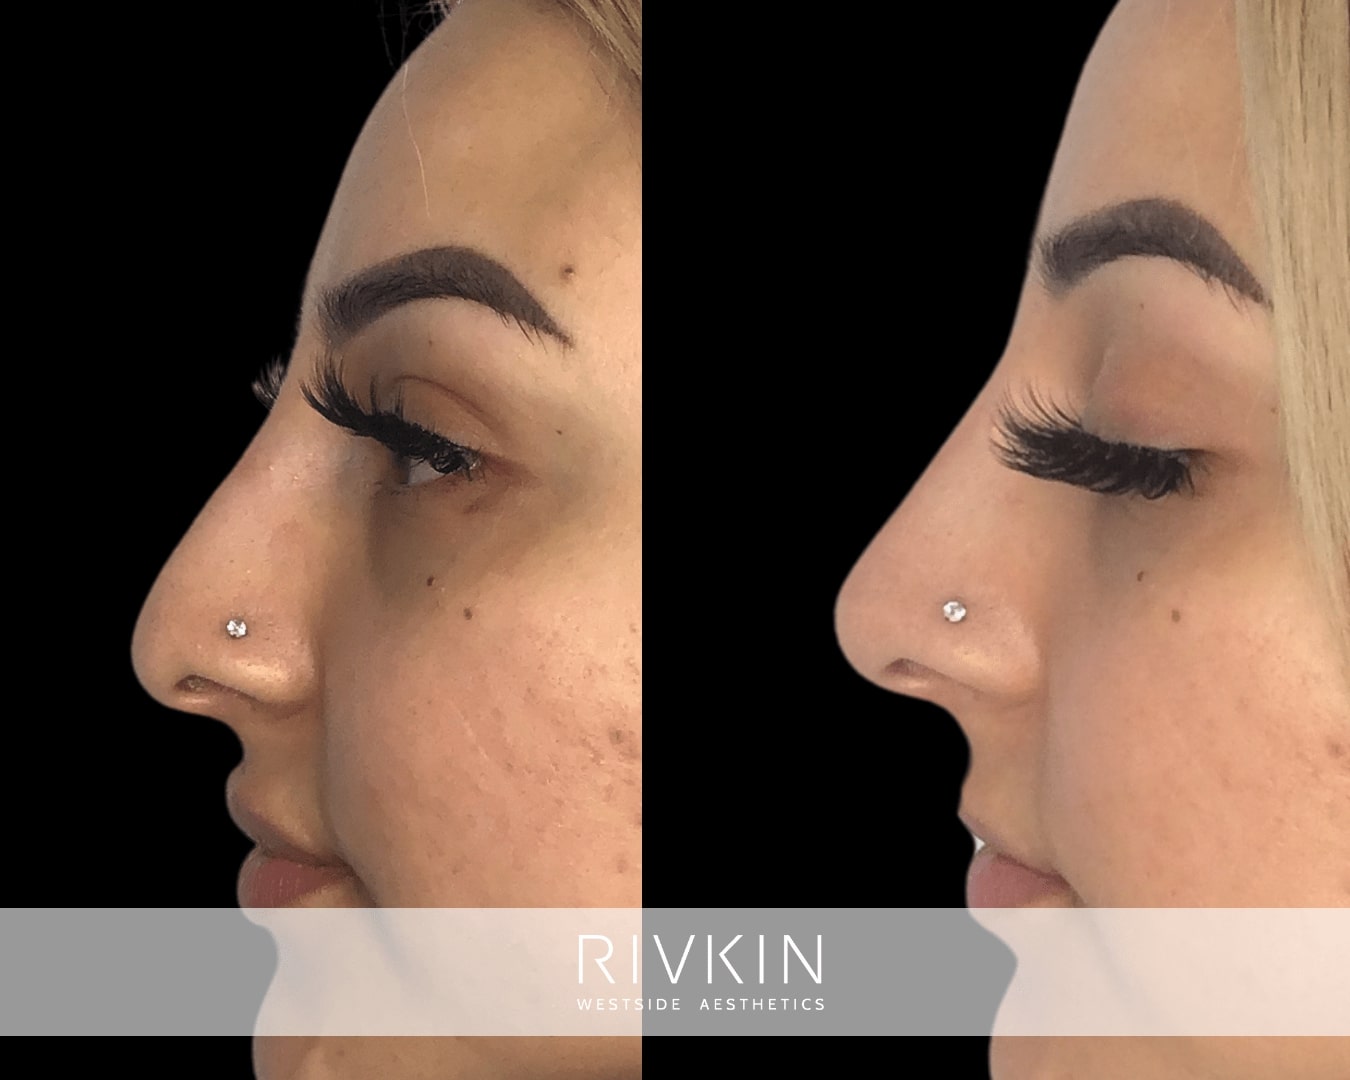 Liquid rhinoplasty lifted this patient's nasal tip improving her side profile, making the nose look more aesthetically pleasing from all angles.